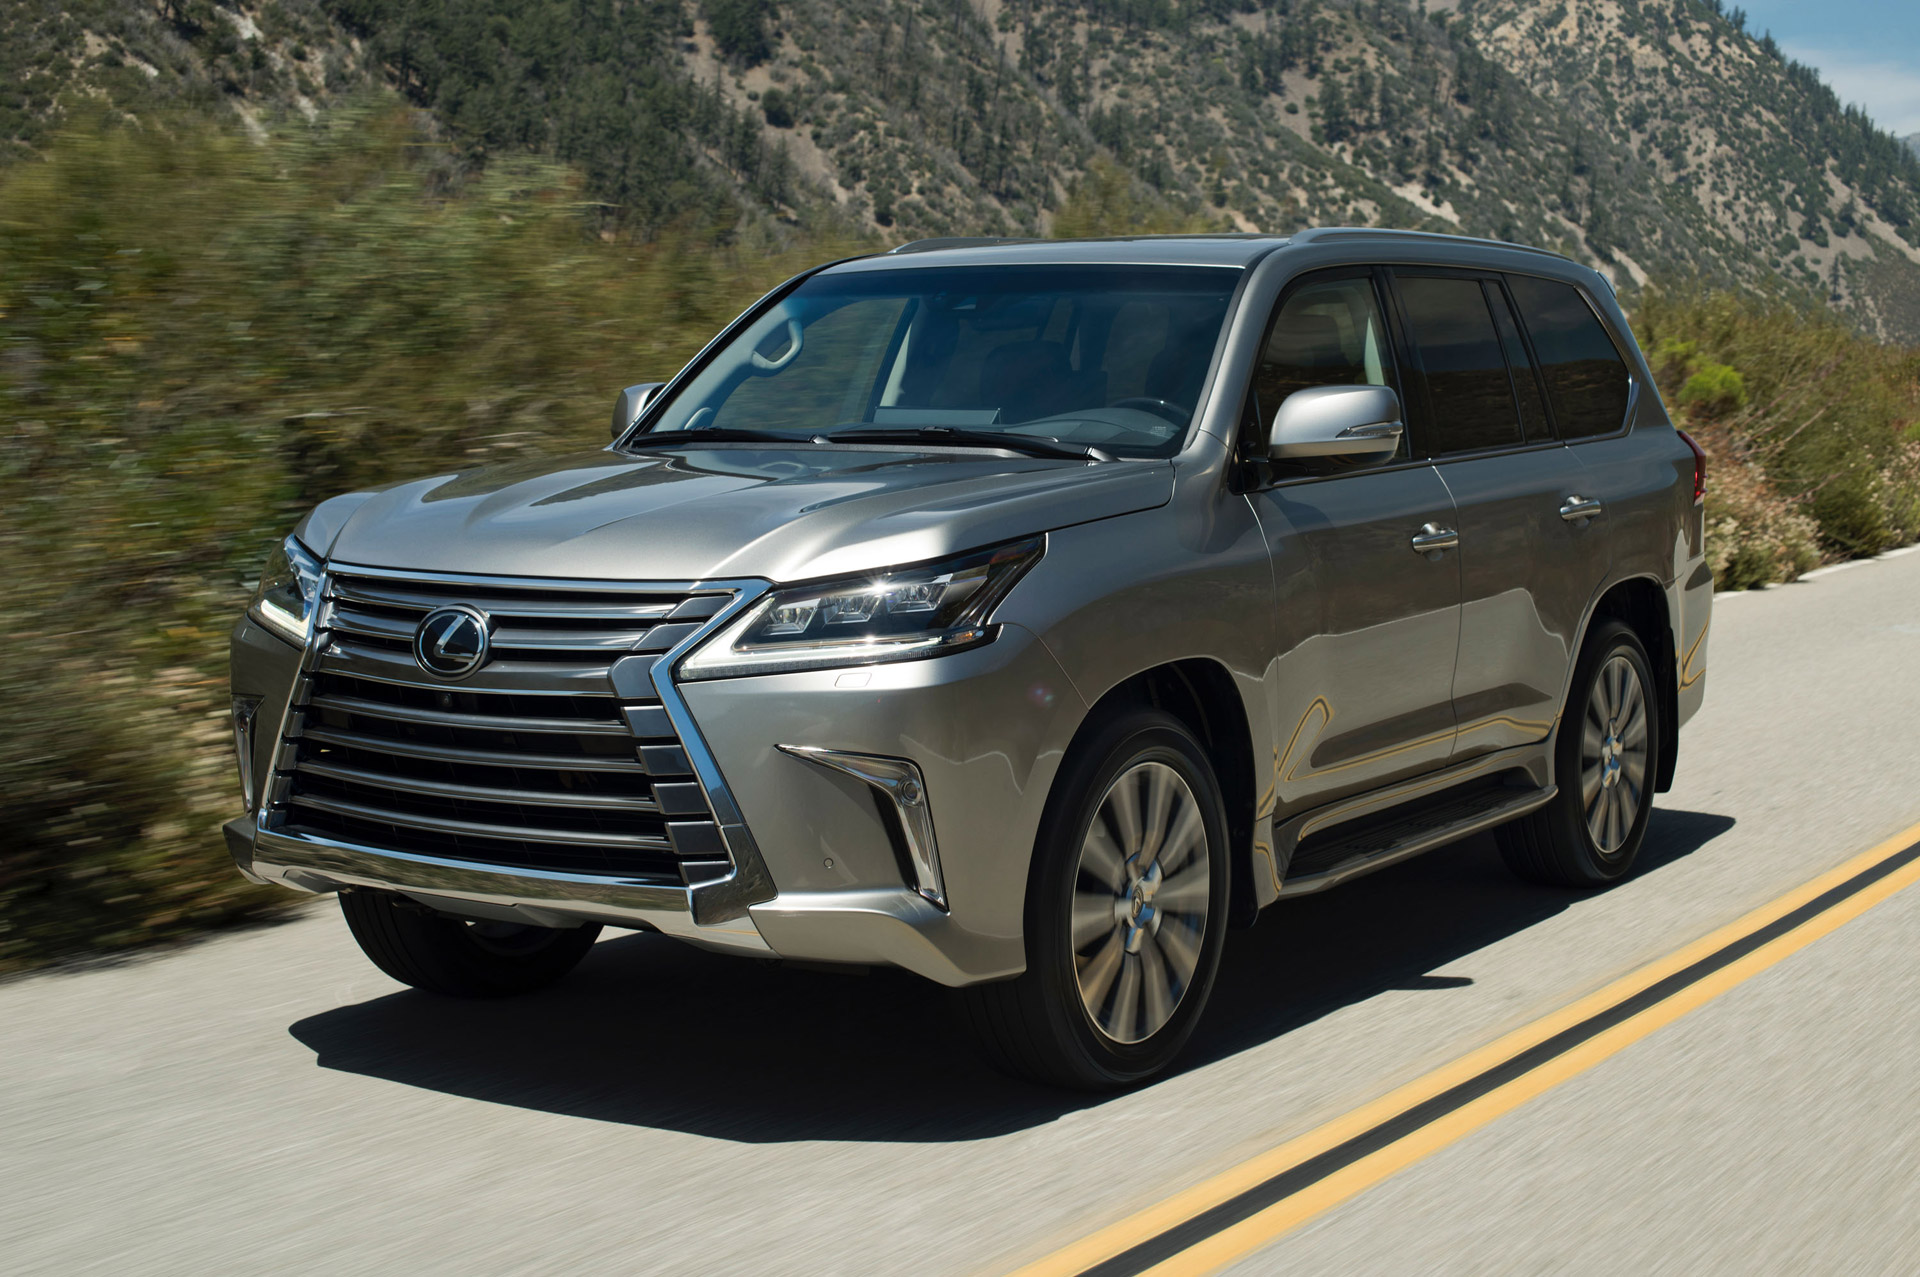 2016 Lexus LX 570 Gets Revised Look More Technology